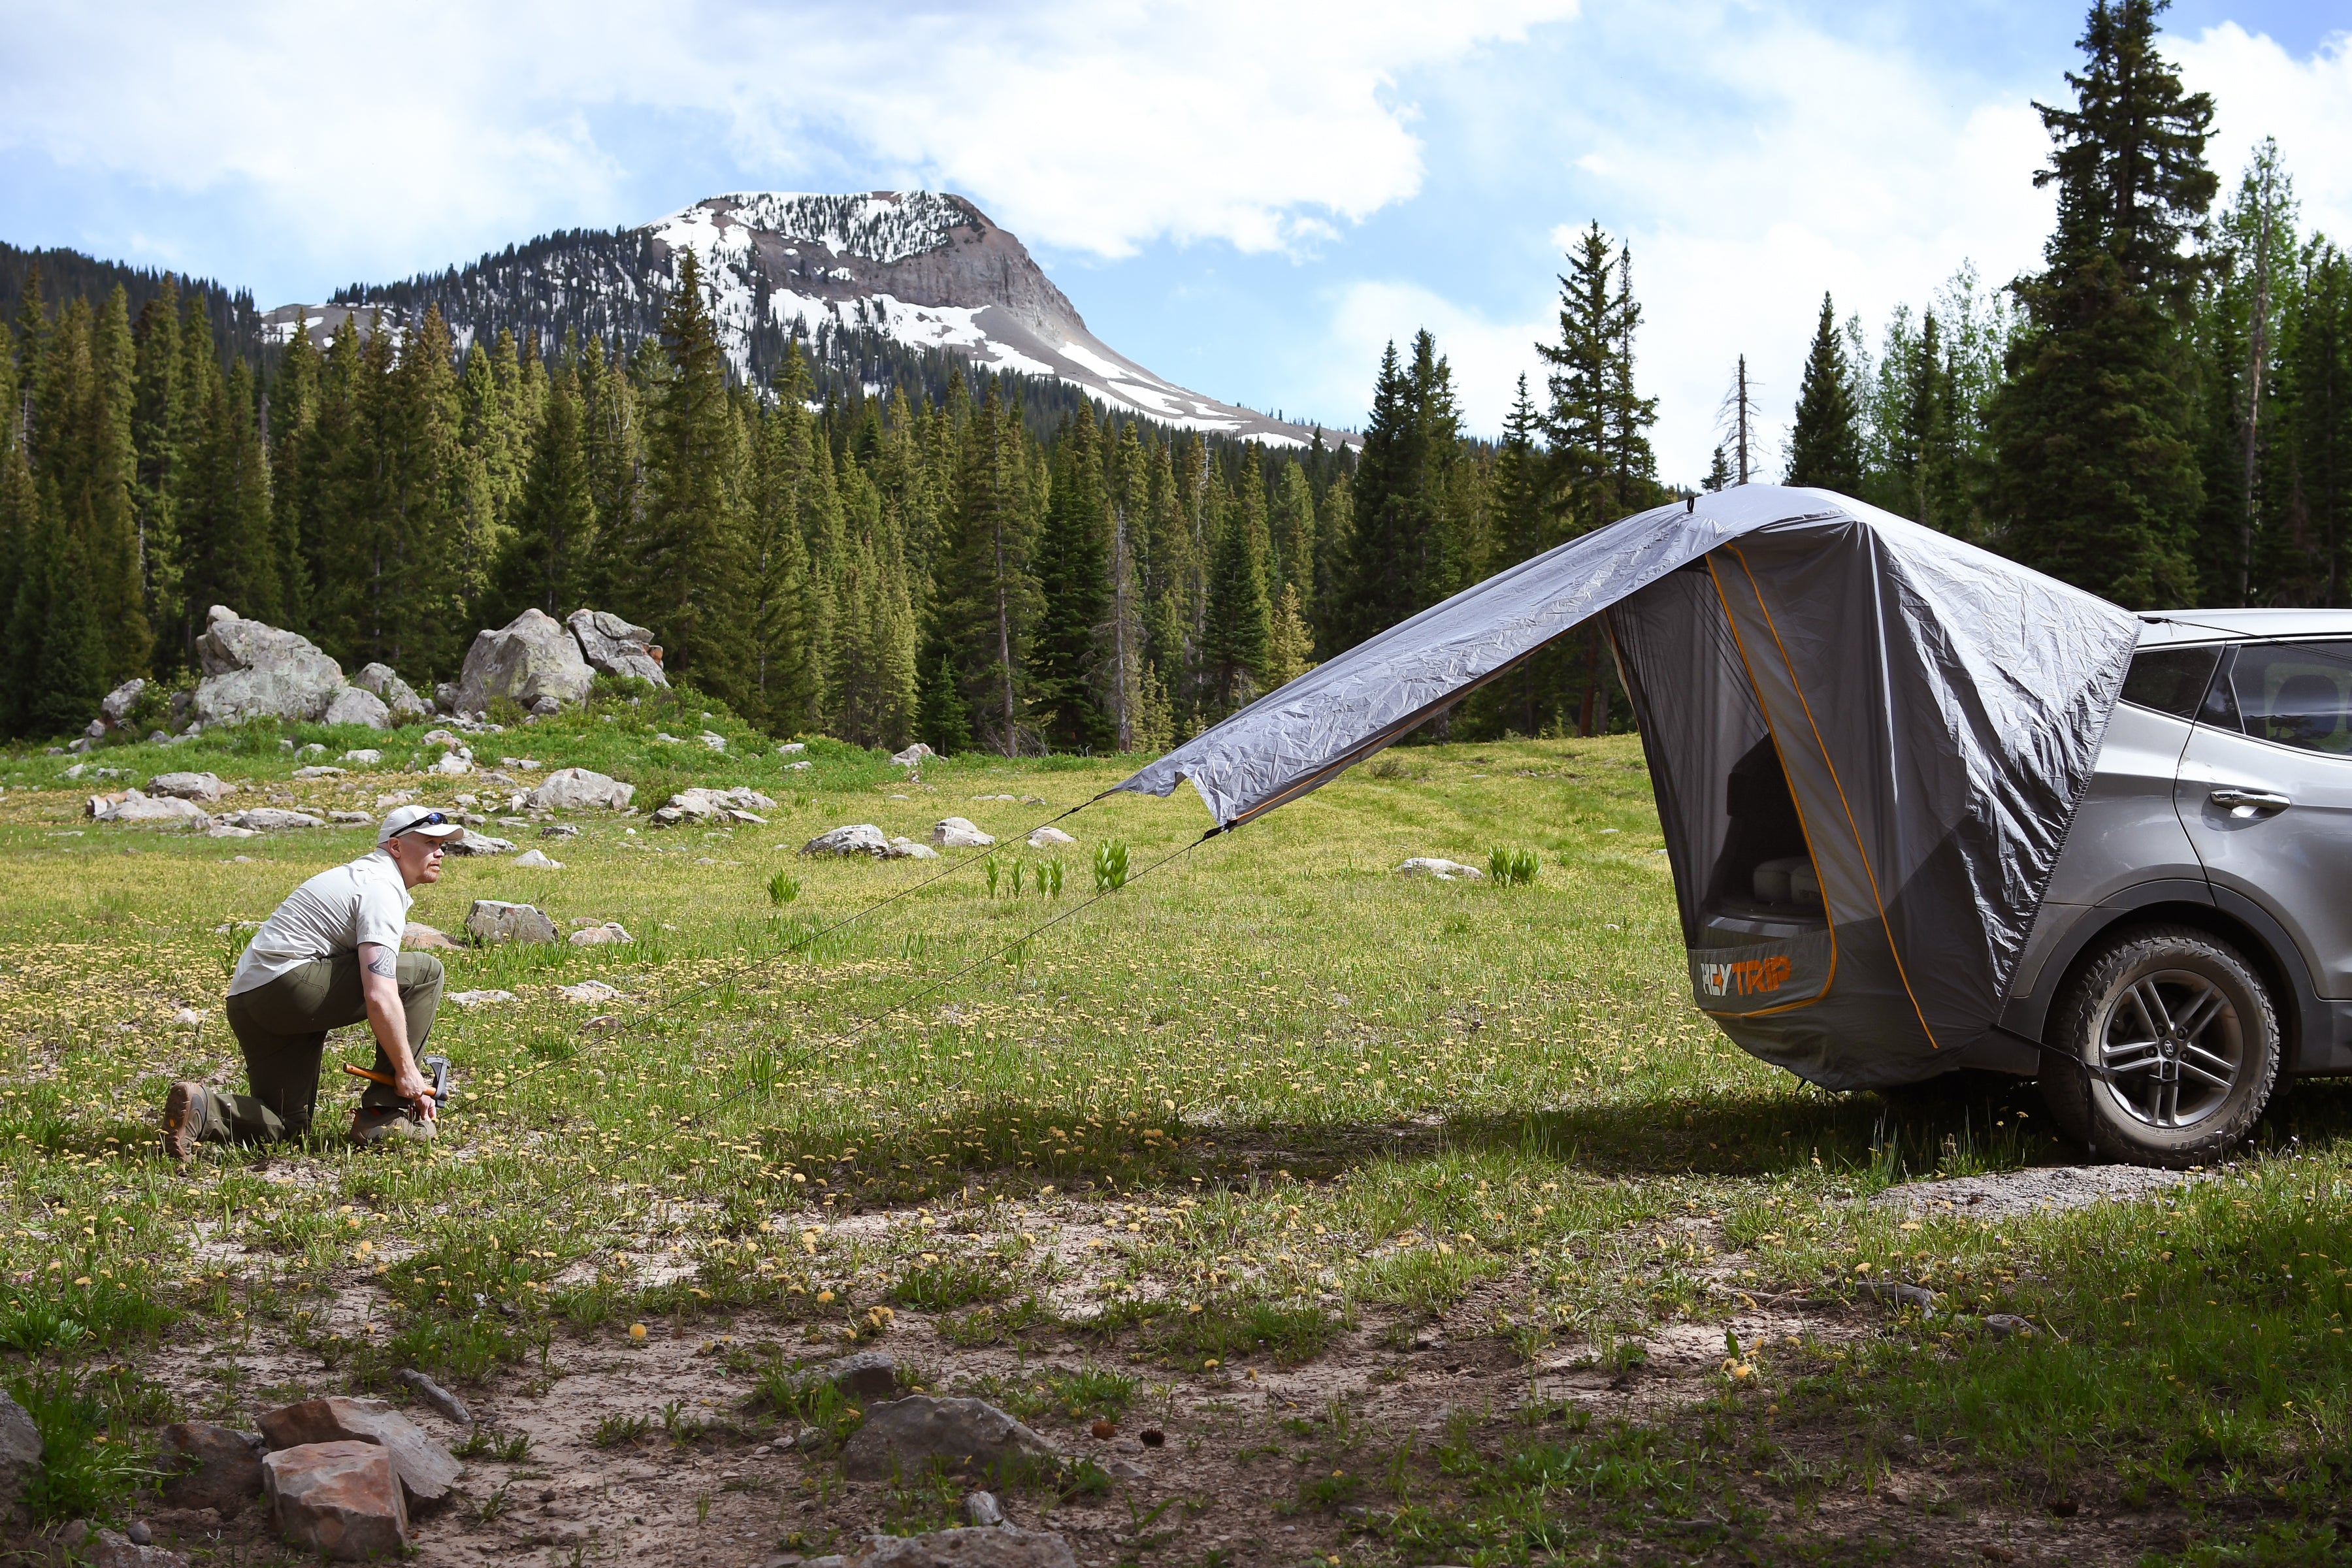 Best all-in-one vehicles for summer camping